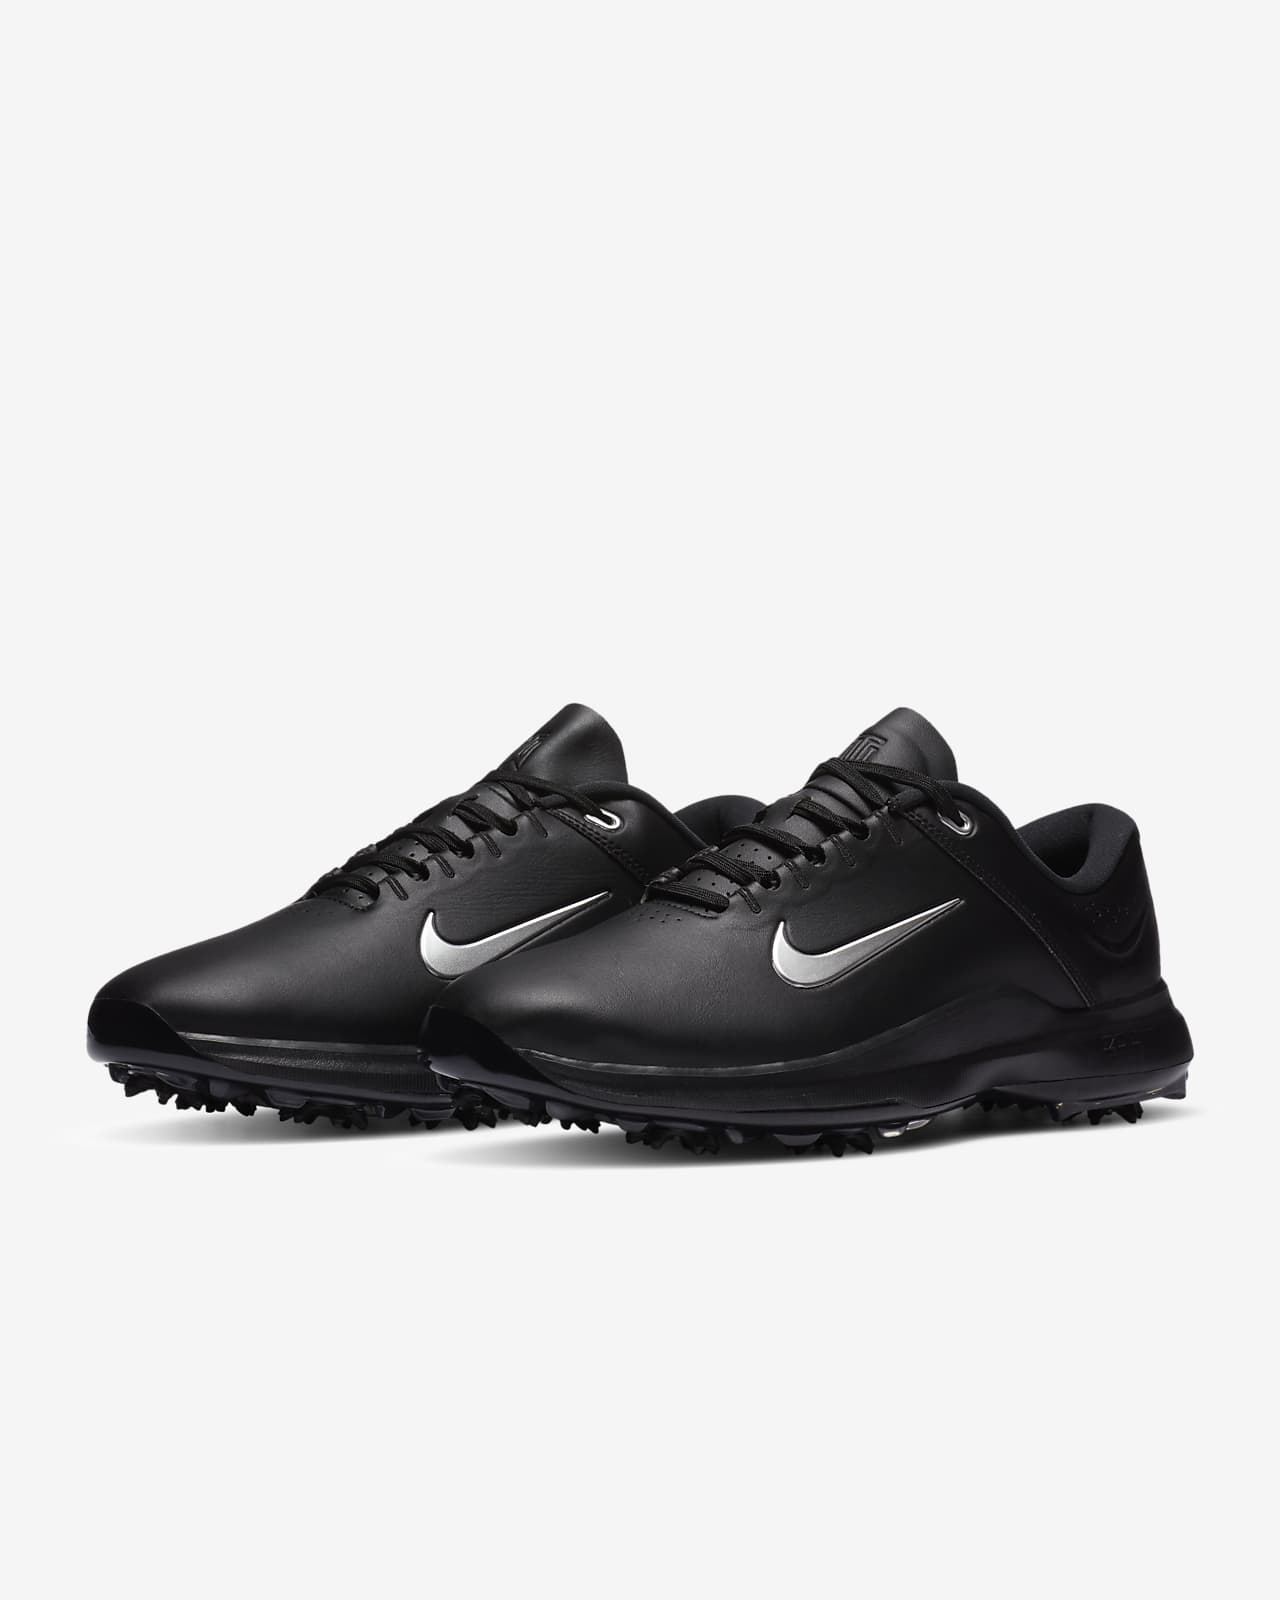 Nike Air Zoom Tiger Woods '20 Men's Golf Shoes